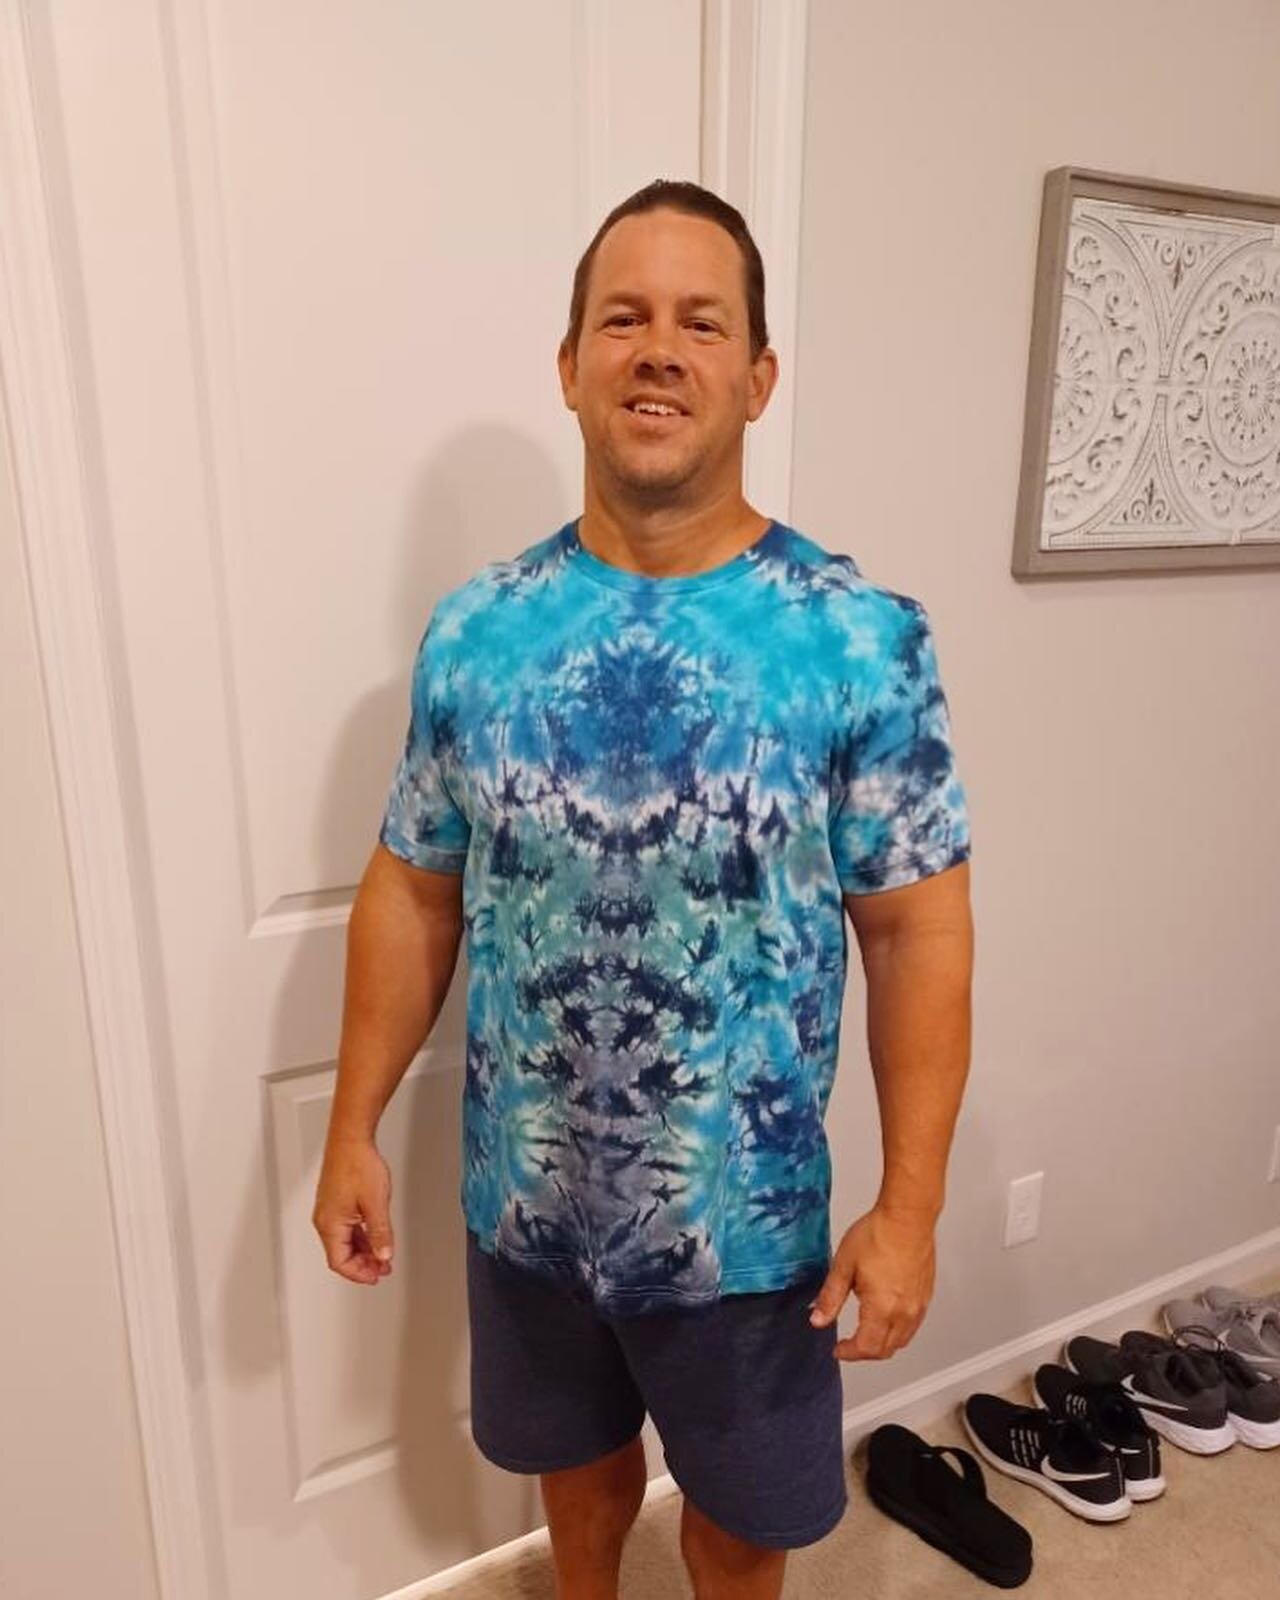 Happy Friday! 🎉

Another serious case of DFS (Dad FOMO Syndrome) has been cured. 🙏🏼

His sweet family has created so many shirts with us - and now he can officially join his tie dye gang! 🙌

#atiedyeparty #DFSawareness #dontforgetdads